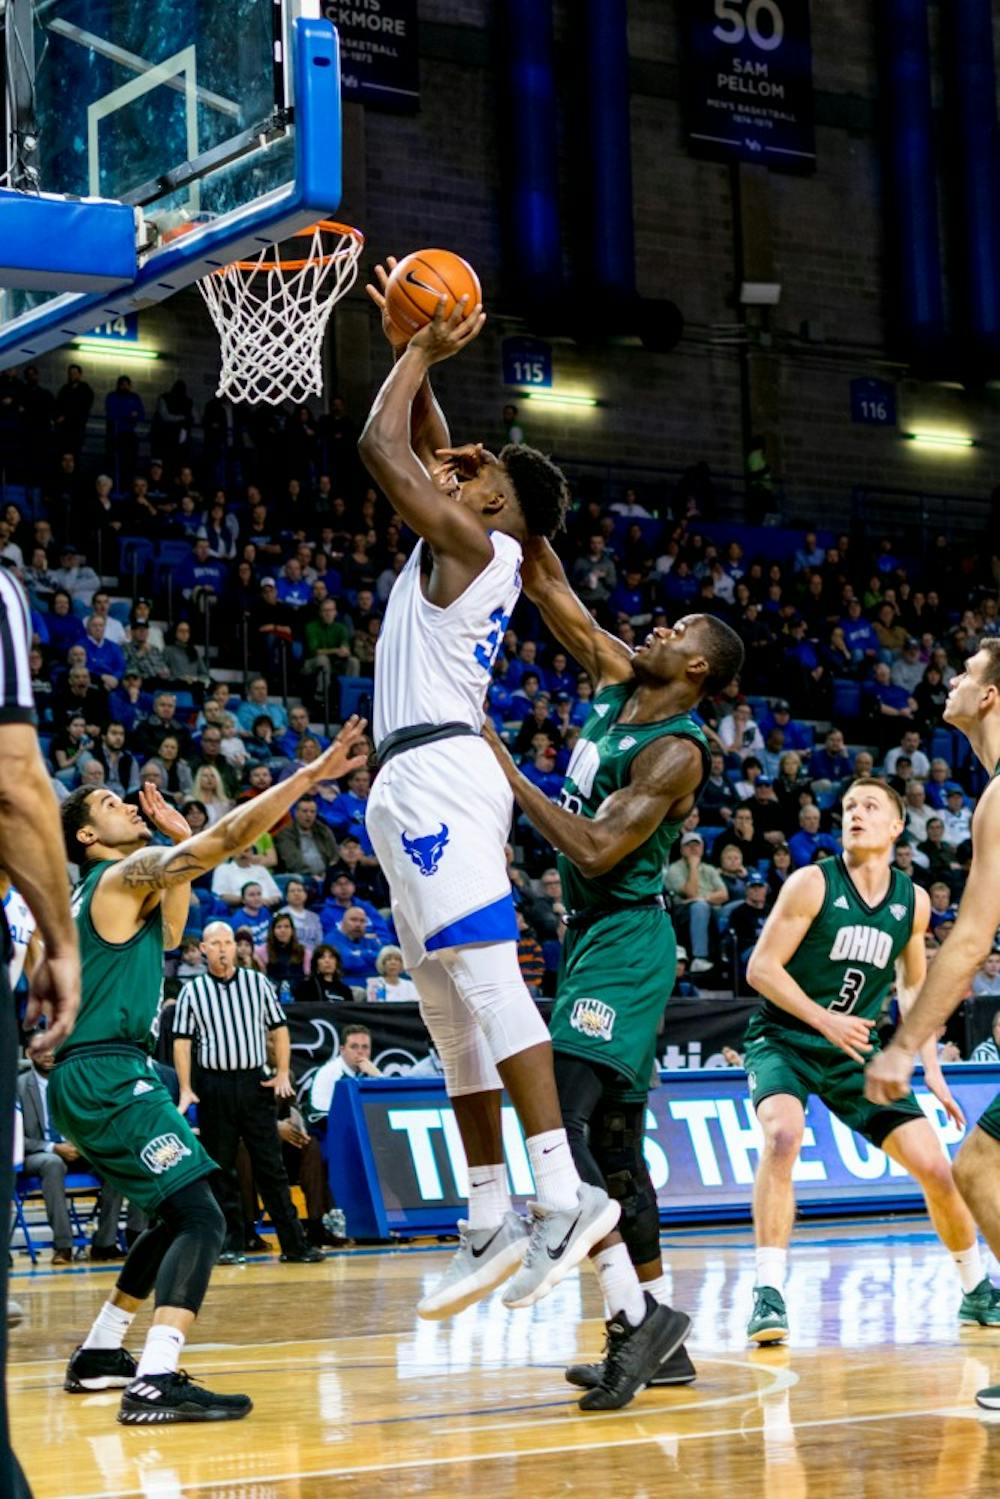 <p>Senior forward Nick Perkins goes for a layup against Ohio. Perkins finished with 17 points during the 82-79 victory as the Bulls secured the MAC regular season championship.</p>